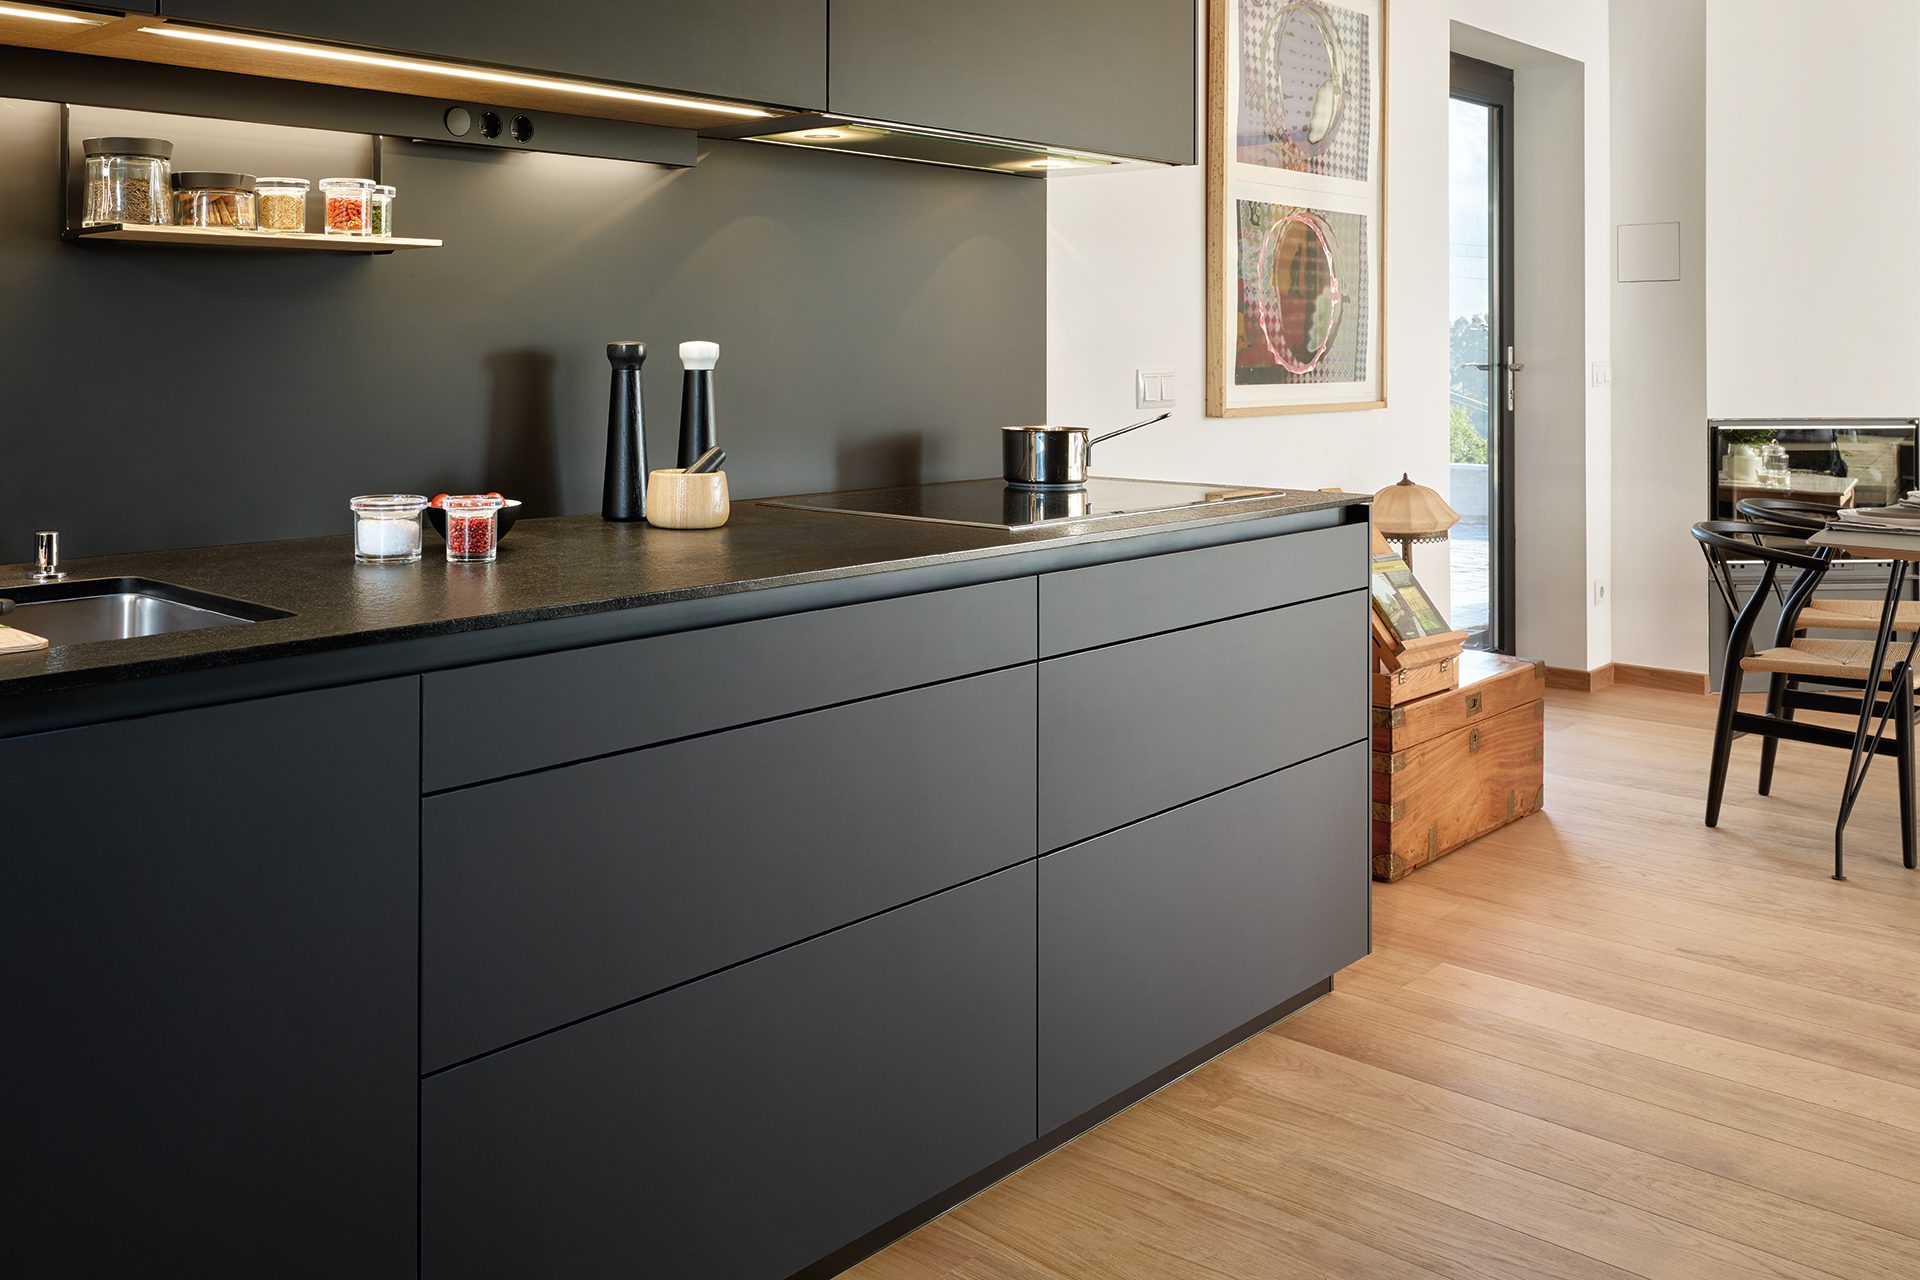 Black, parallel kitchen with a pull-out module system